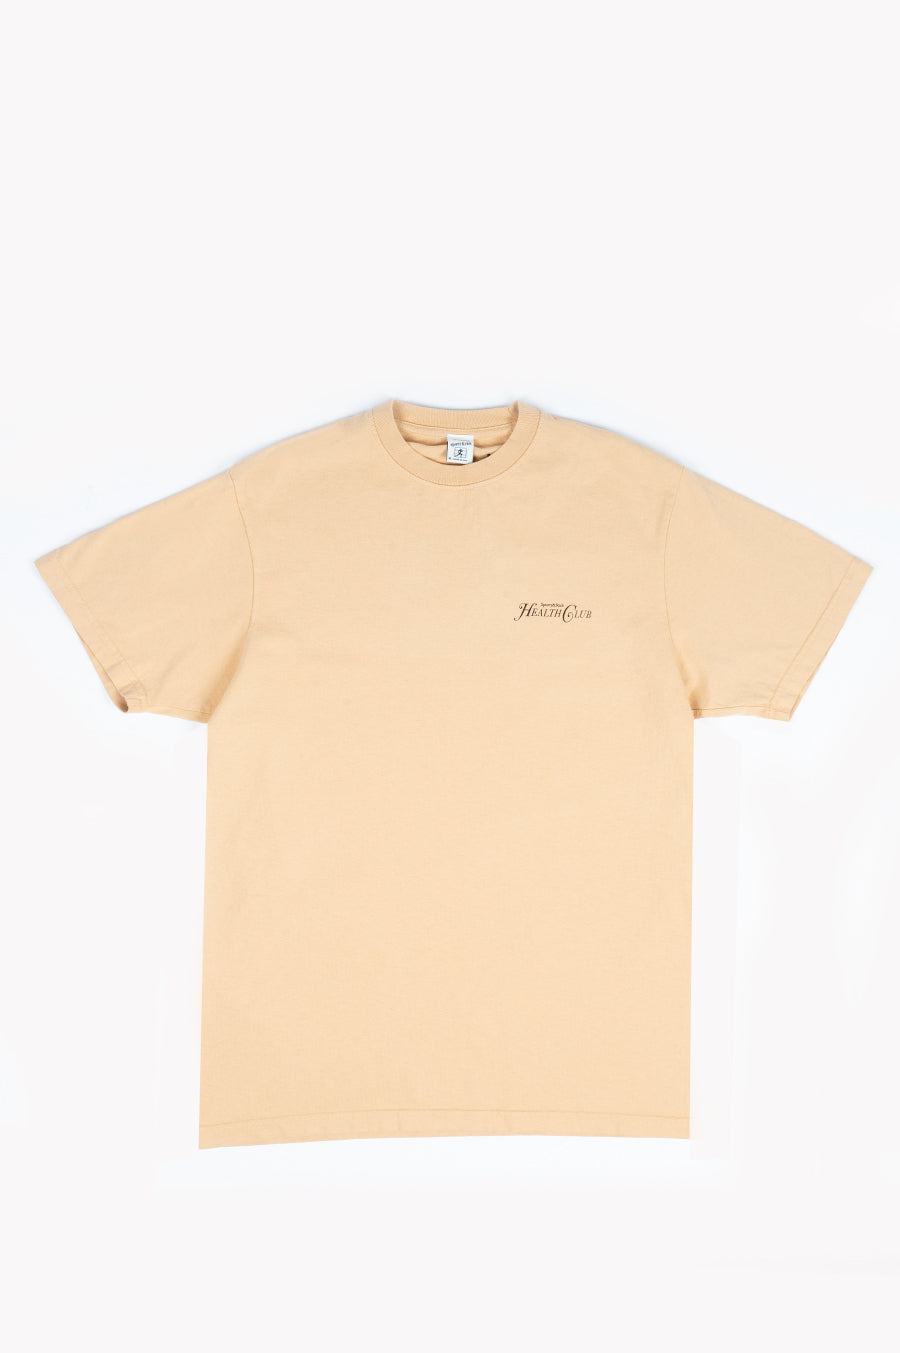 SPORTY AND RICH RIZZOLI T-SHIRT CAMEL